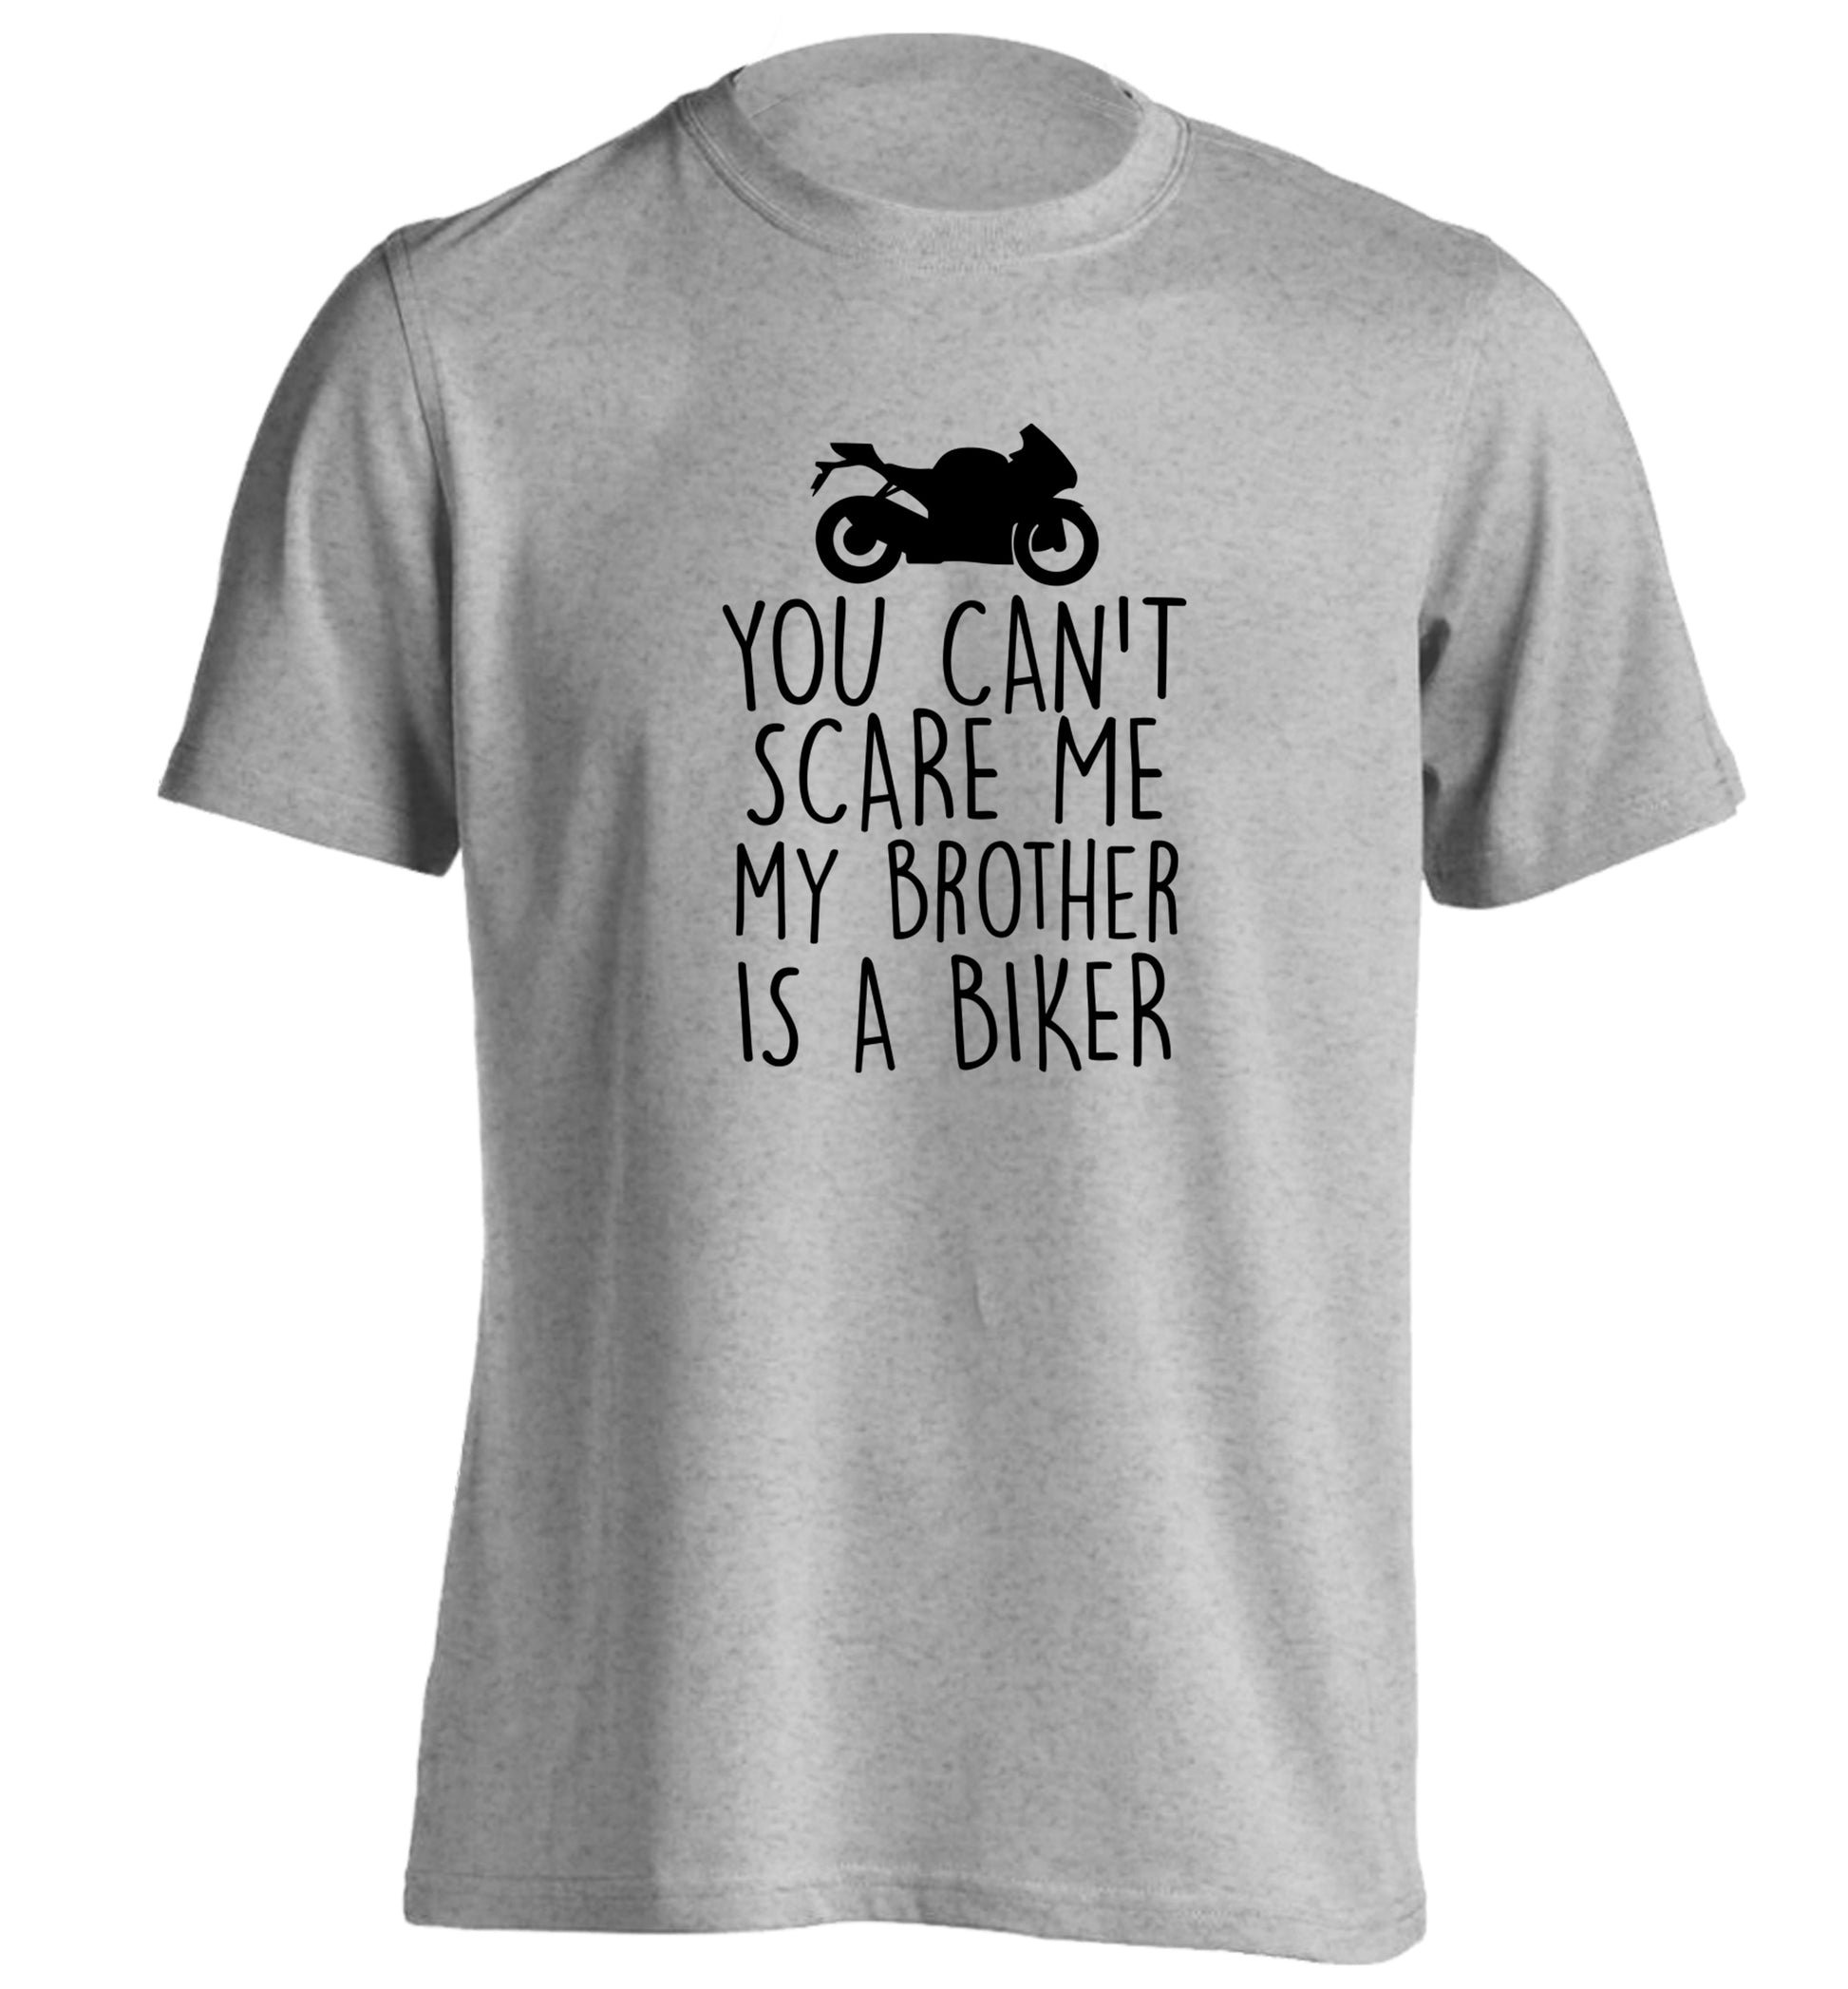 You can't scare me my brother is a biker adults unisex grey Tshirt 2XL